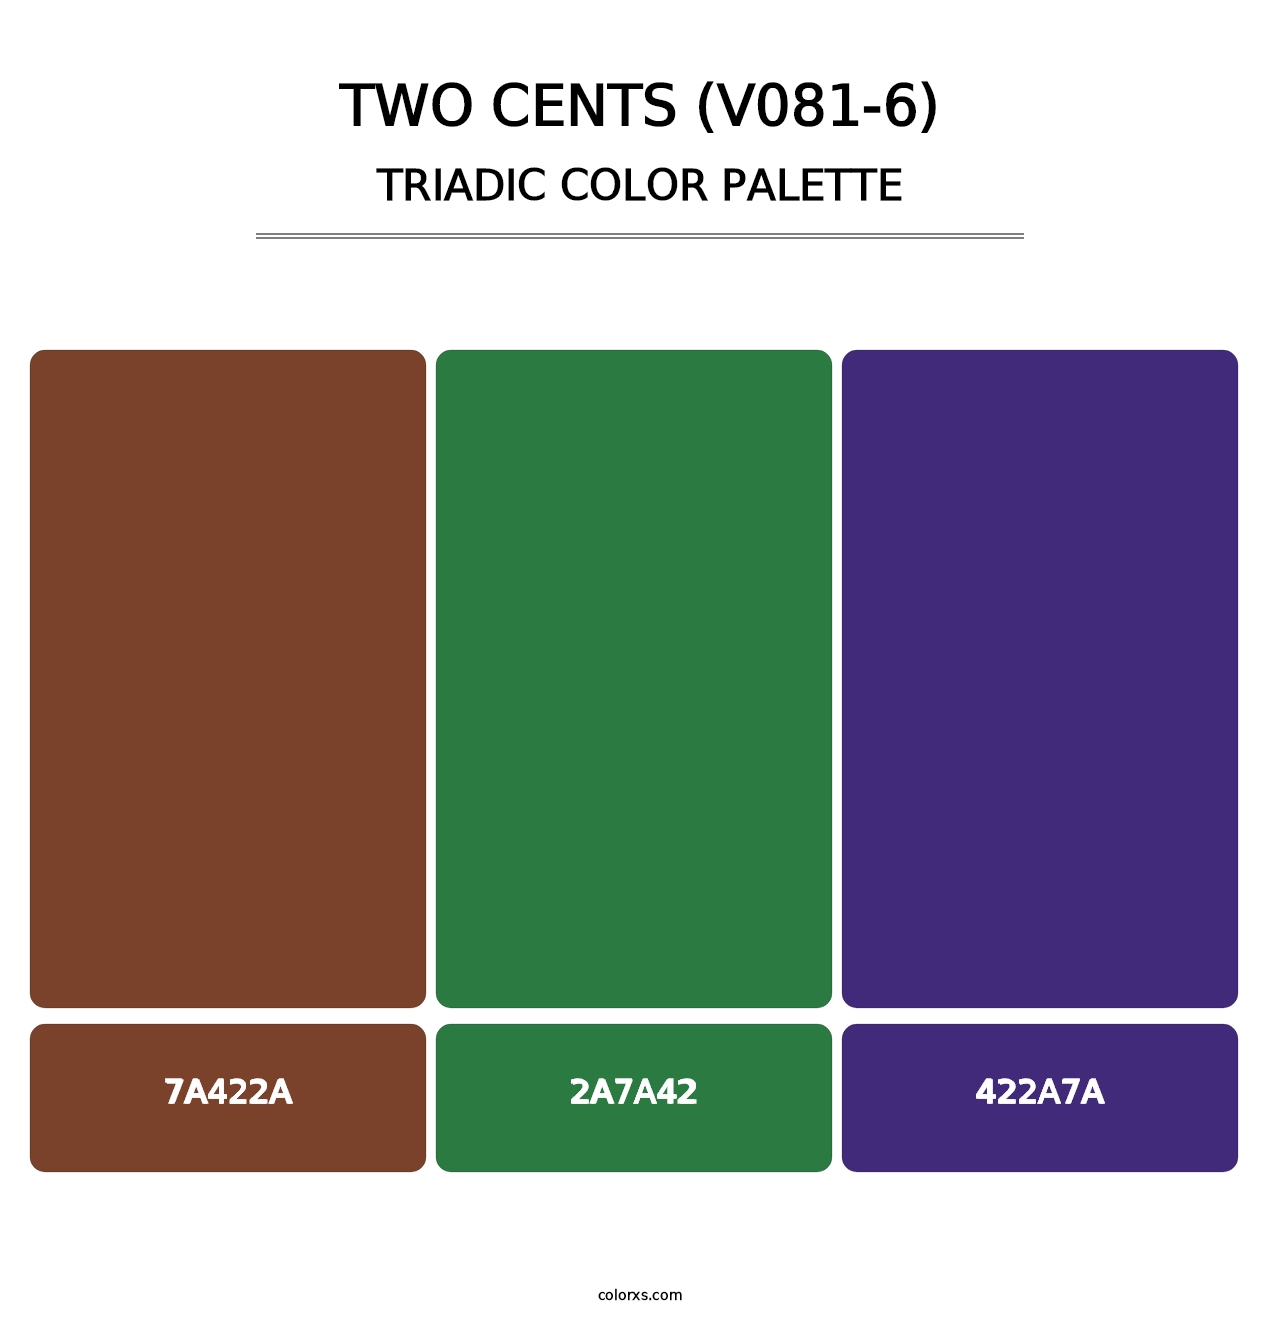 Two Cents (V081-6) - Triadic Color Palette